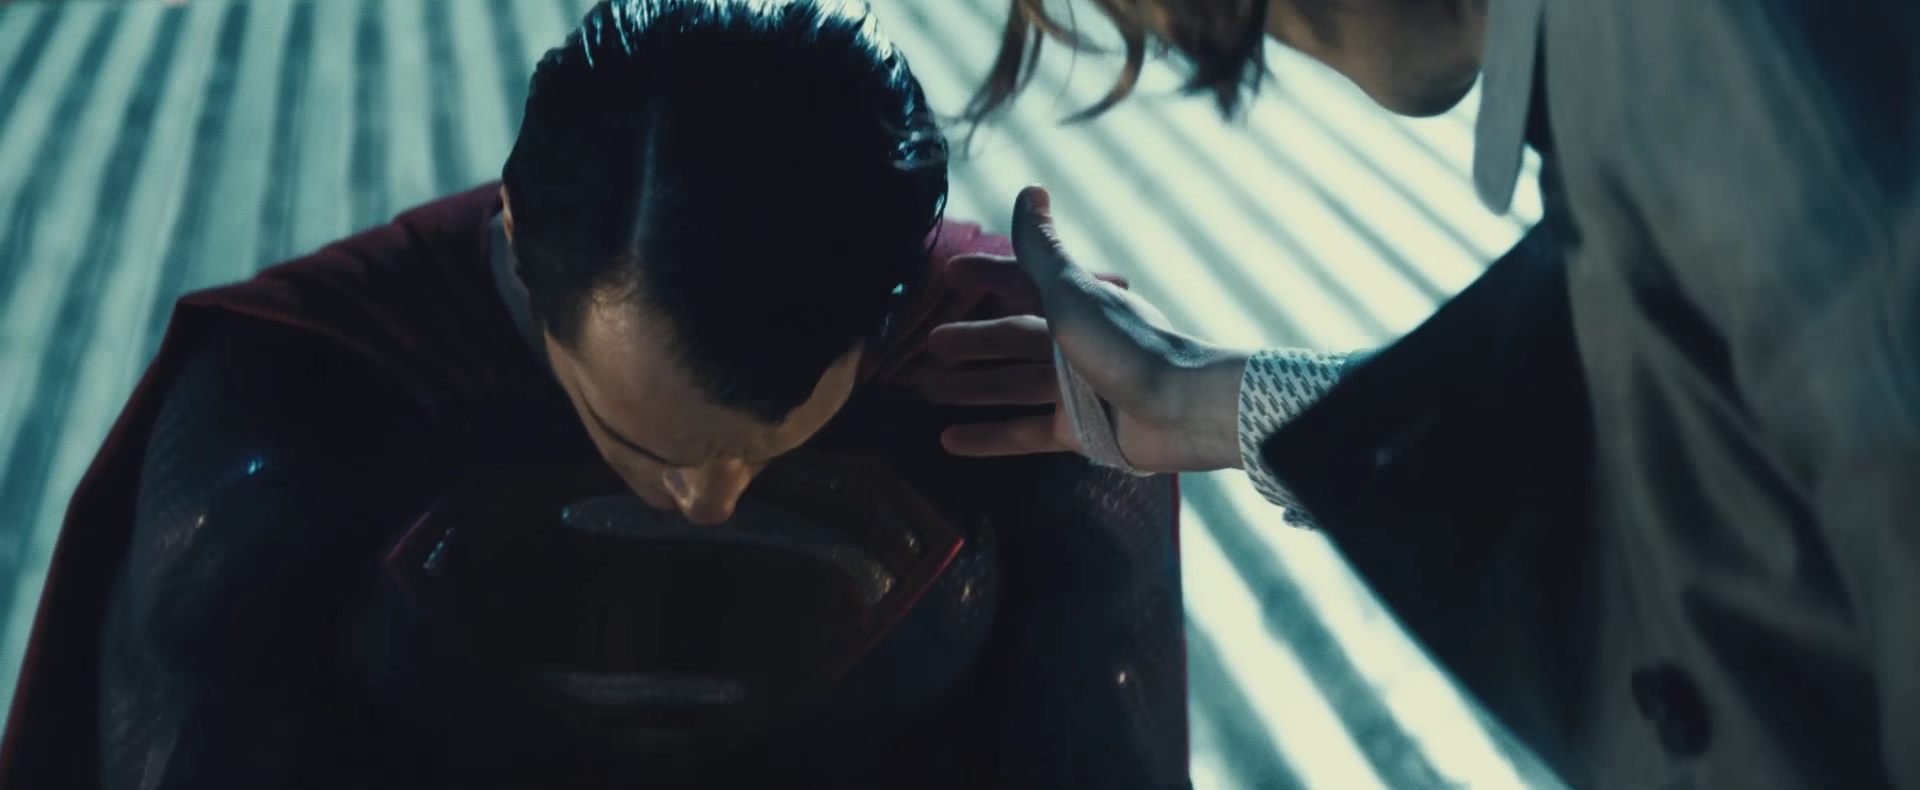 Superman Gives Lex A Super-Stinkface In Another New Batman V Superman Clip